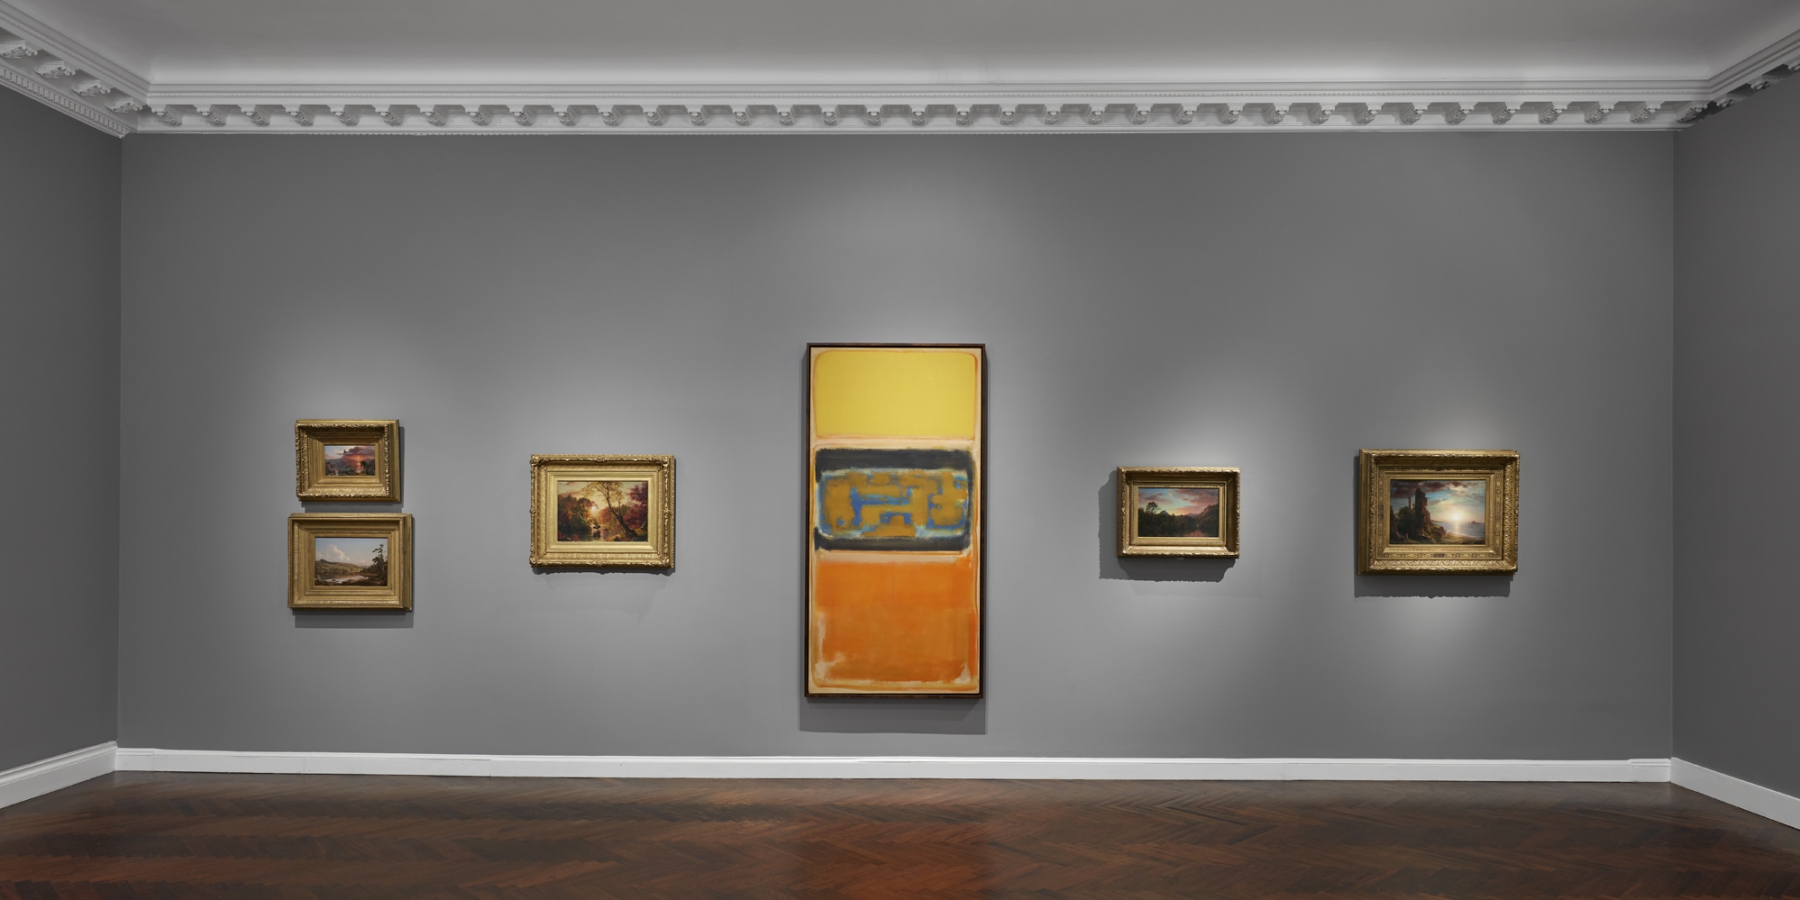 Photography by Tom Powel Imaging, Inc., Reproduction, including downloading of Rothko Artworks is prohibited by copyright laws and international conventions without the express permission of the copyright holder.